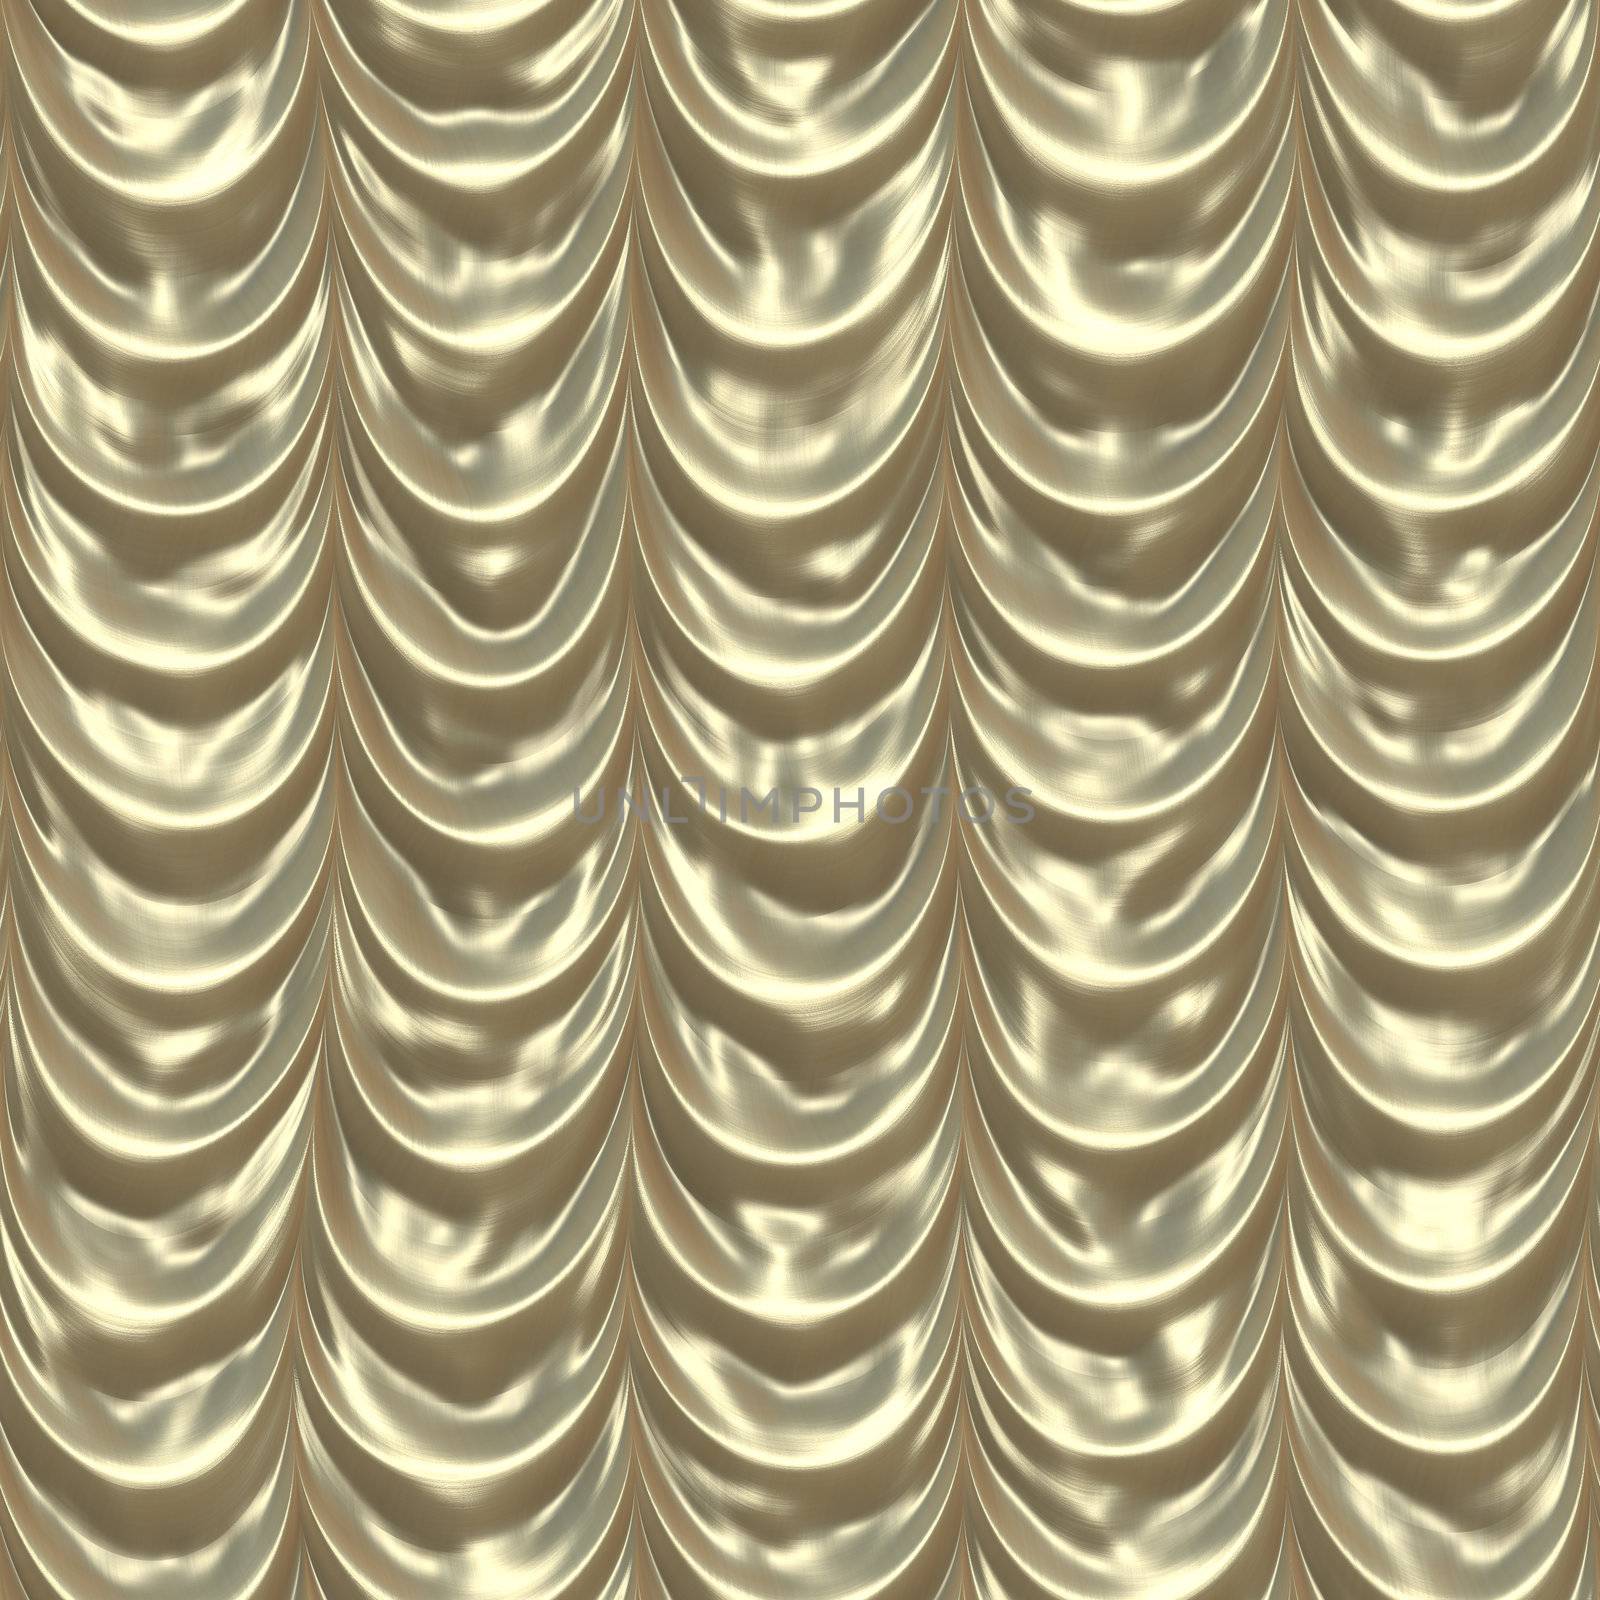 
elegant golden satin or silk background, very smooth and will tile seamlessly as a pattern